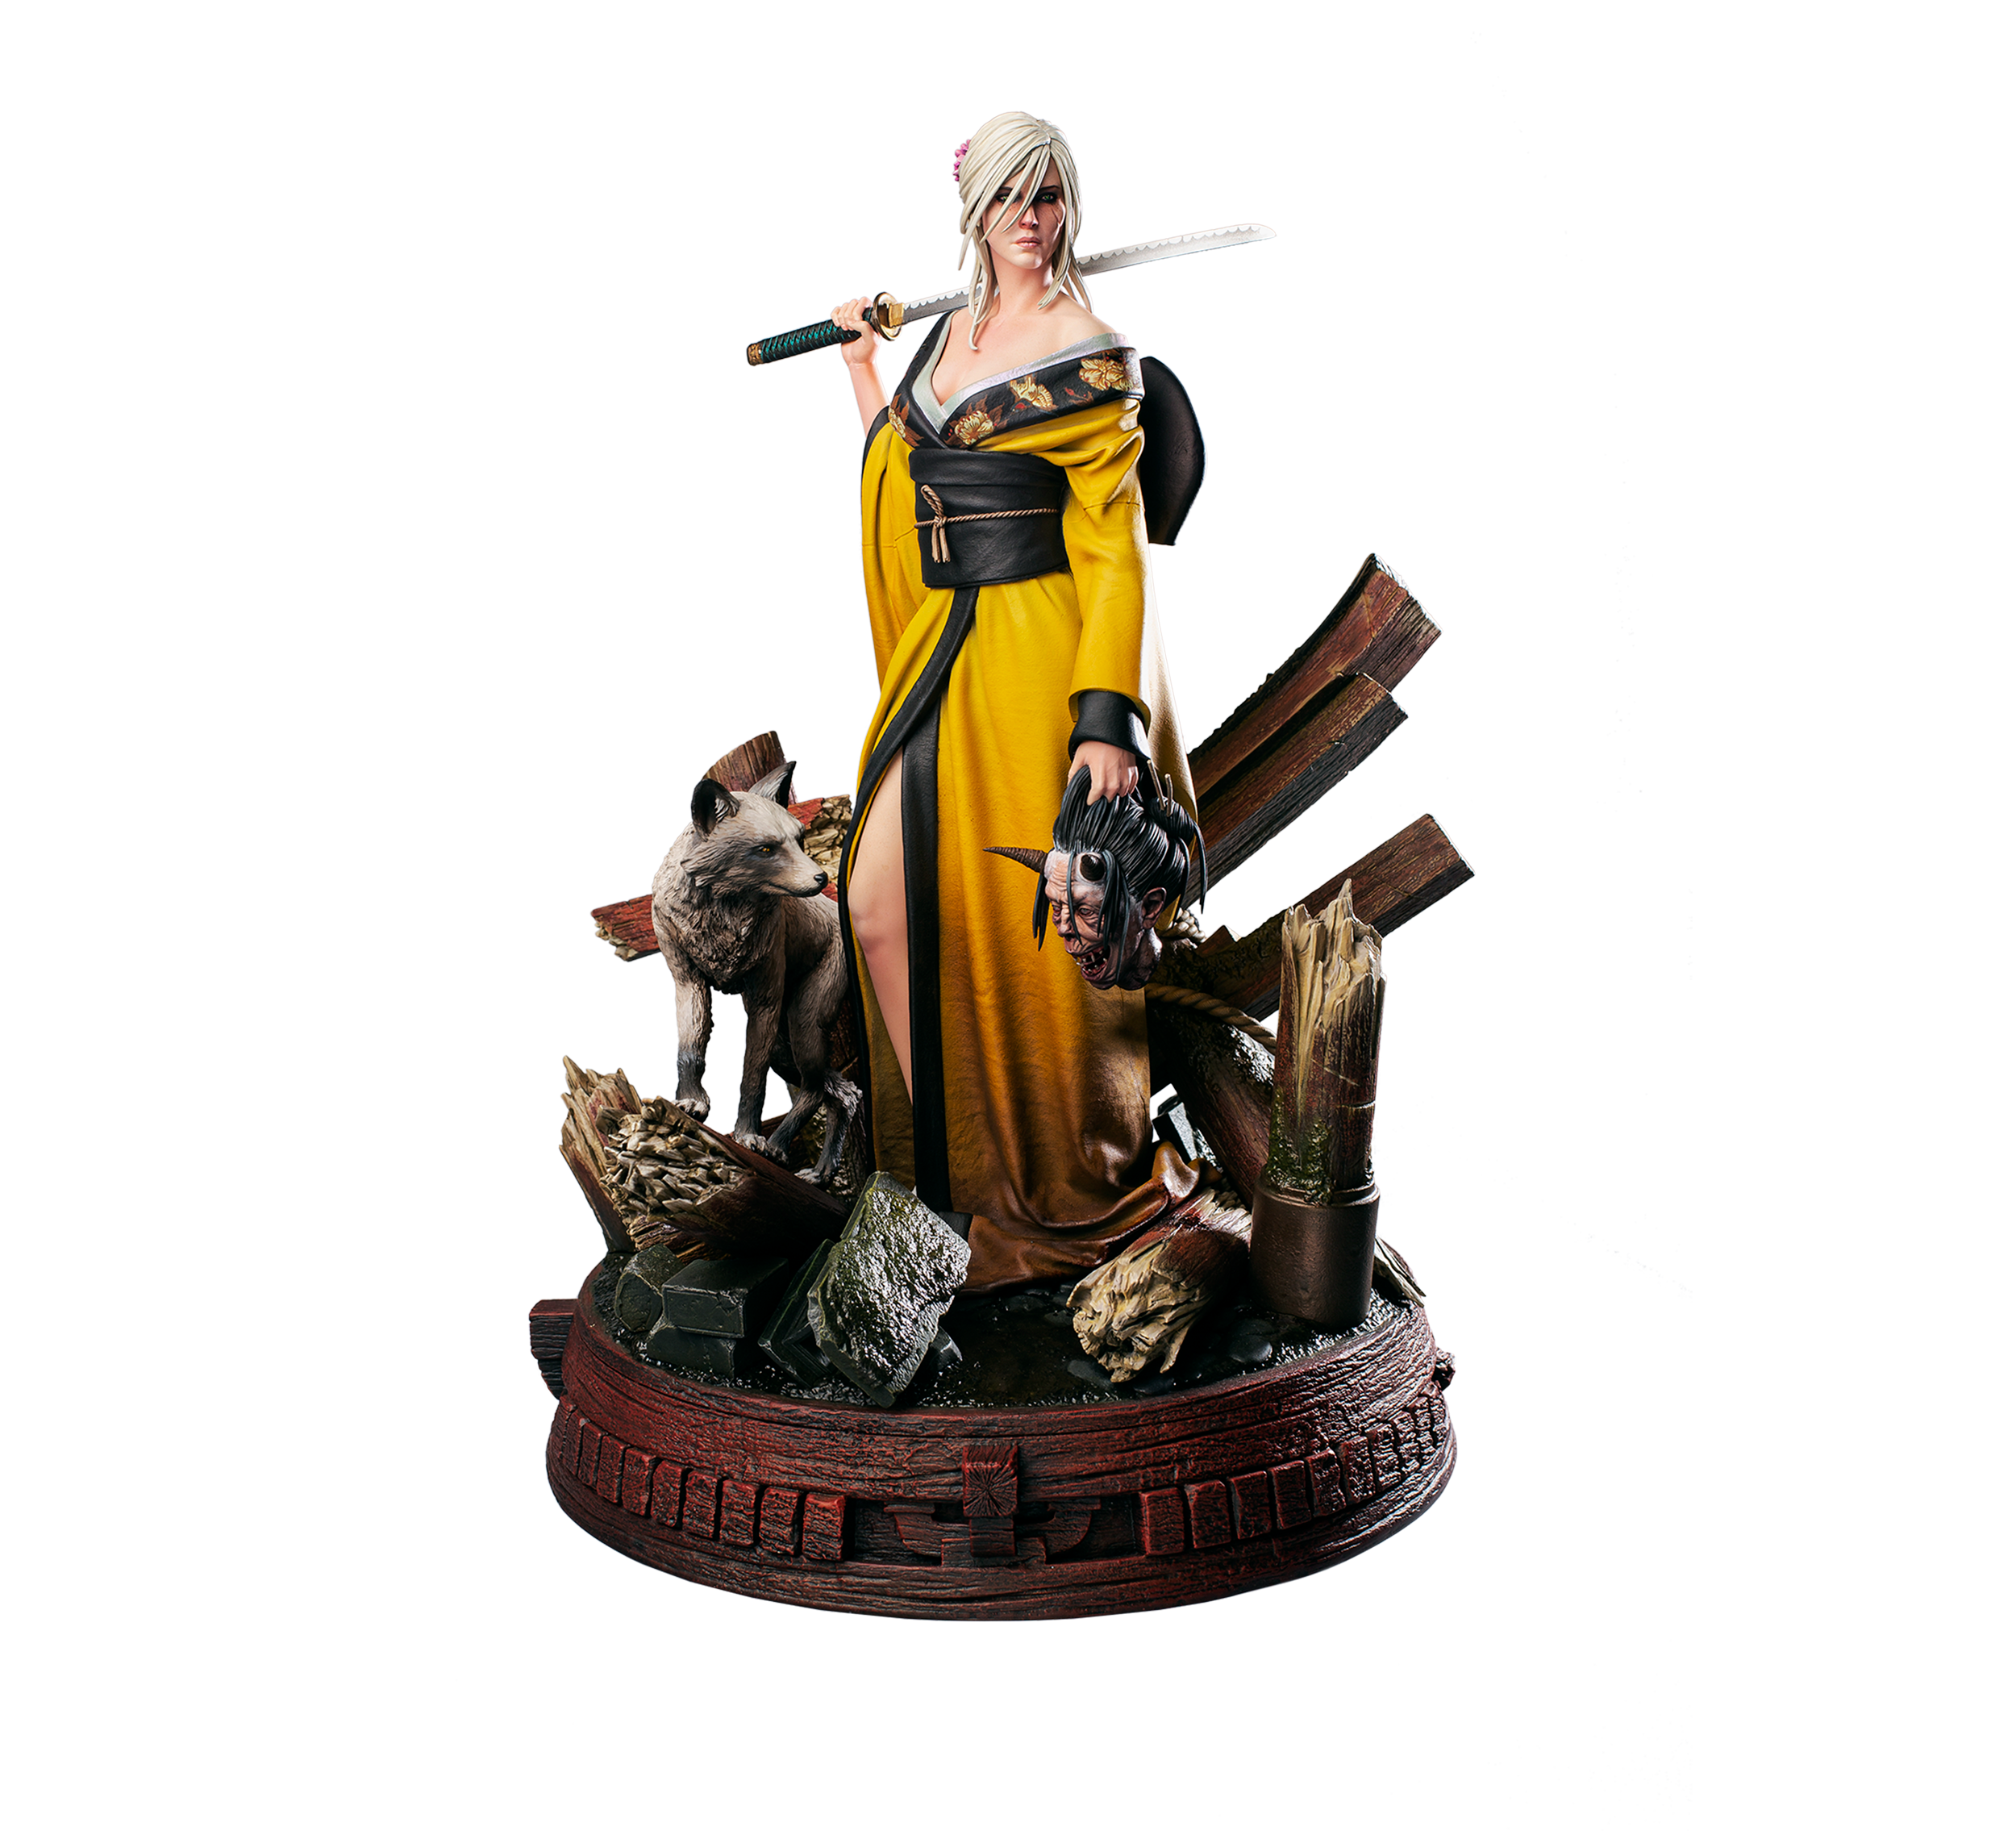 Witcher 3 S Ciri Gets A Japanese Style Makeover For A New Figurine Gonintendo